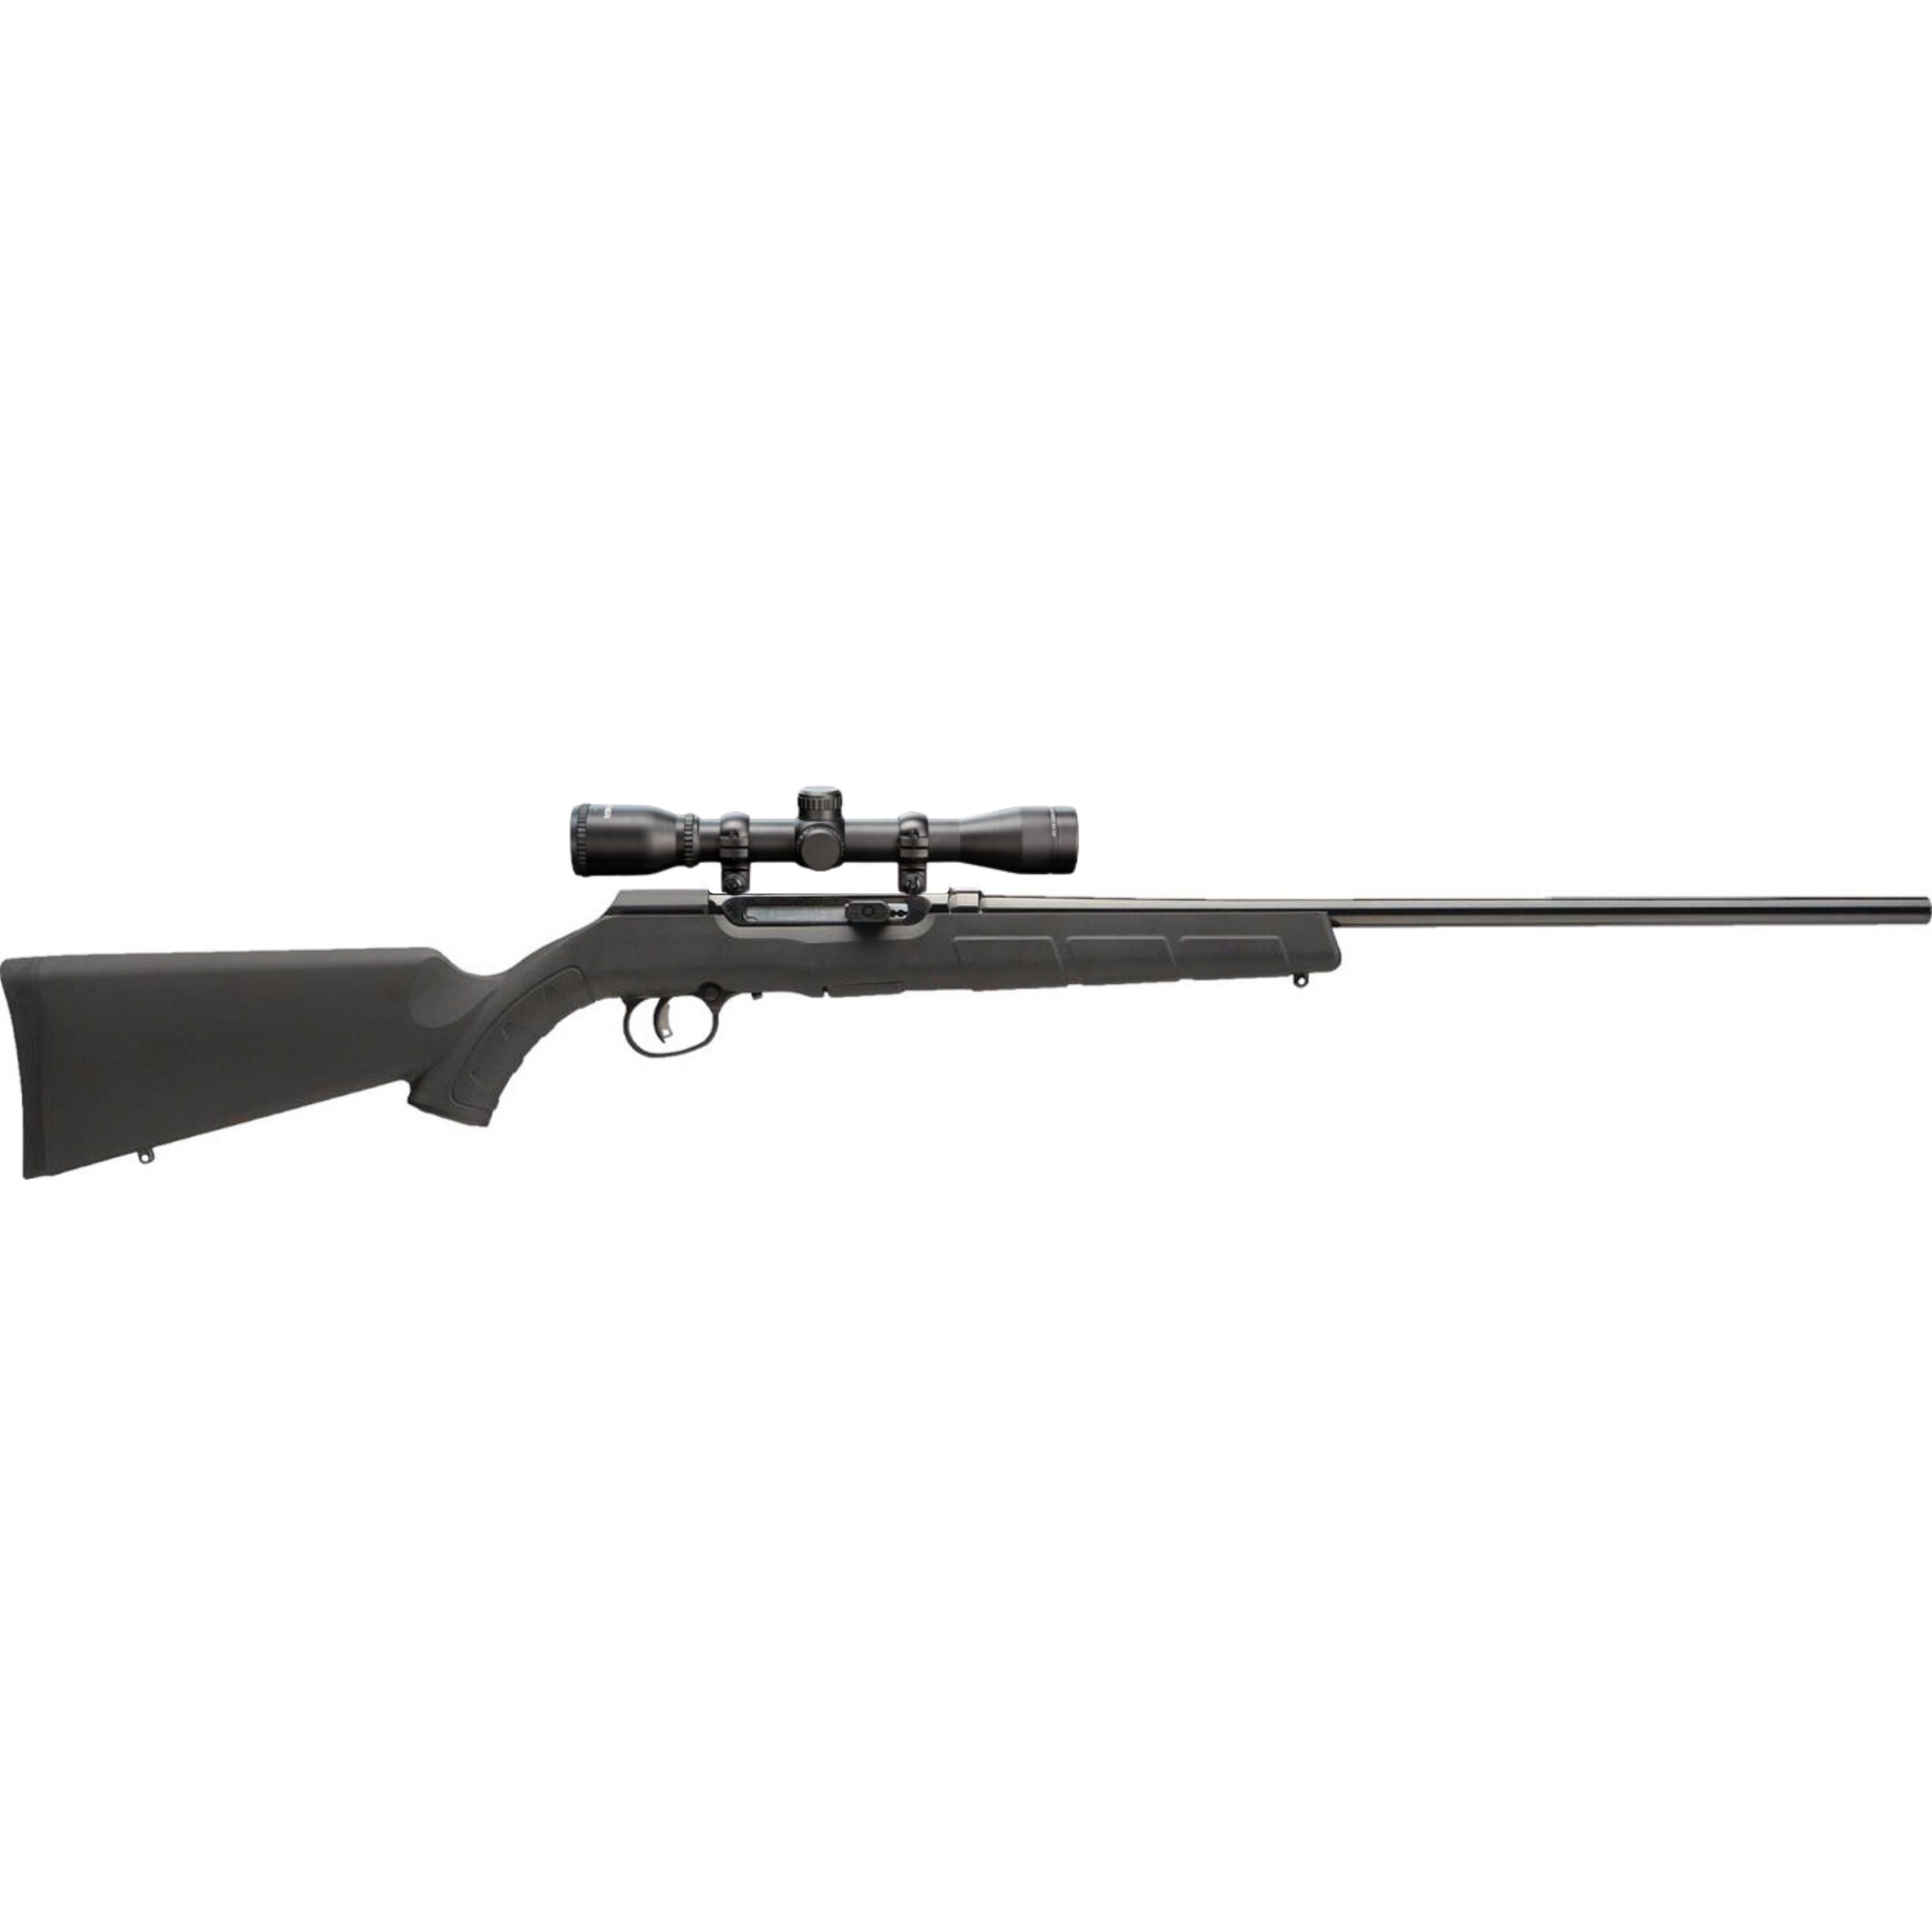 "A22" cal .22 LR semi-automatic rifle with scope